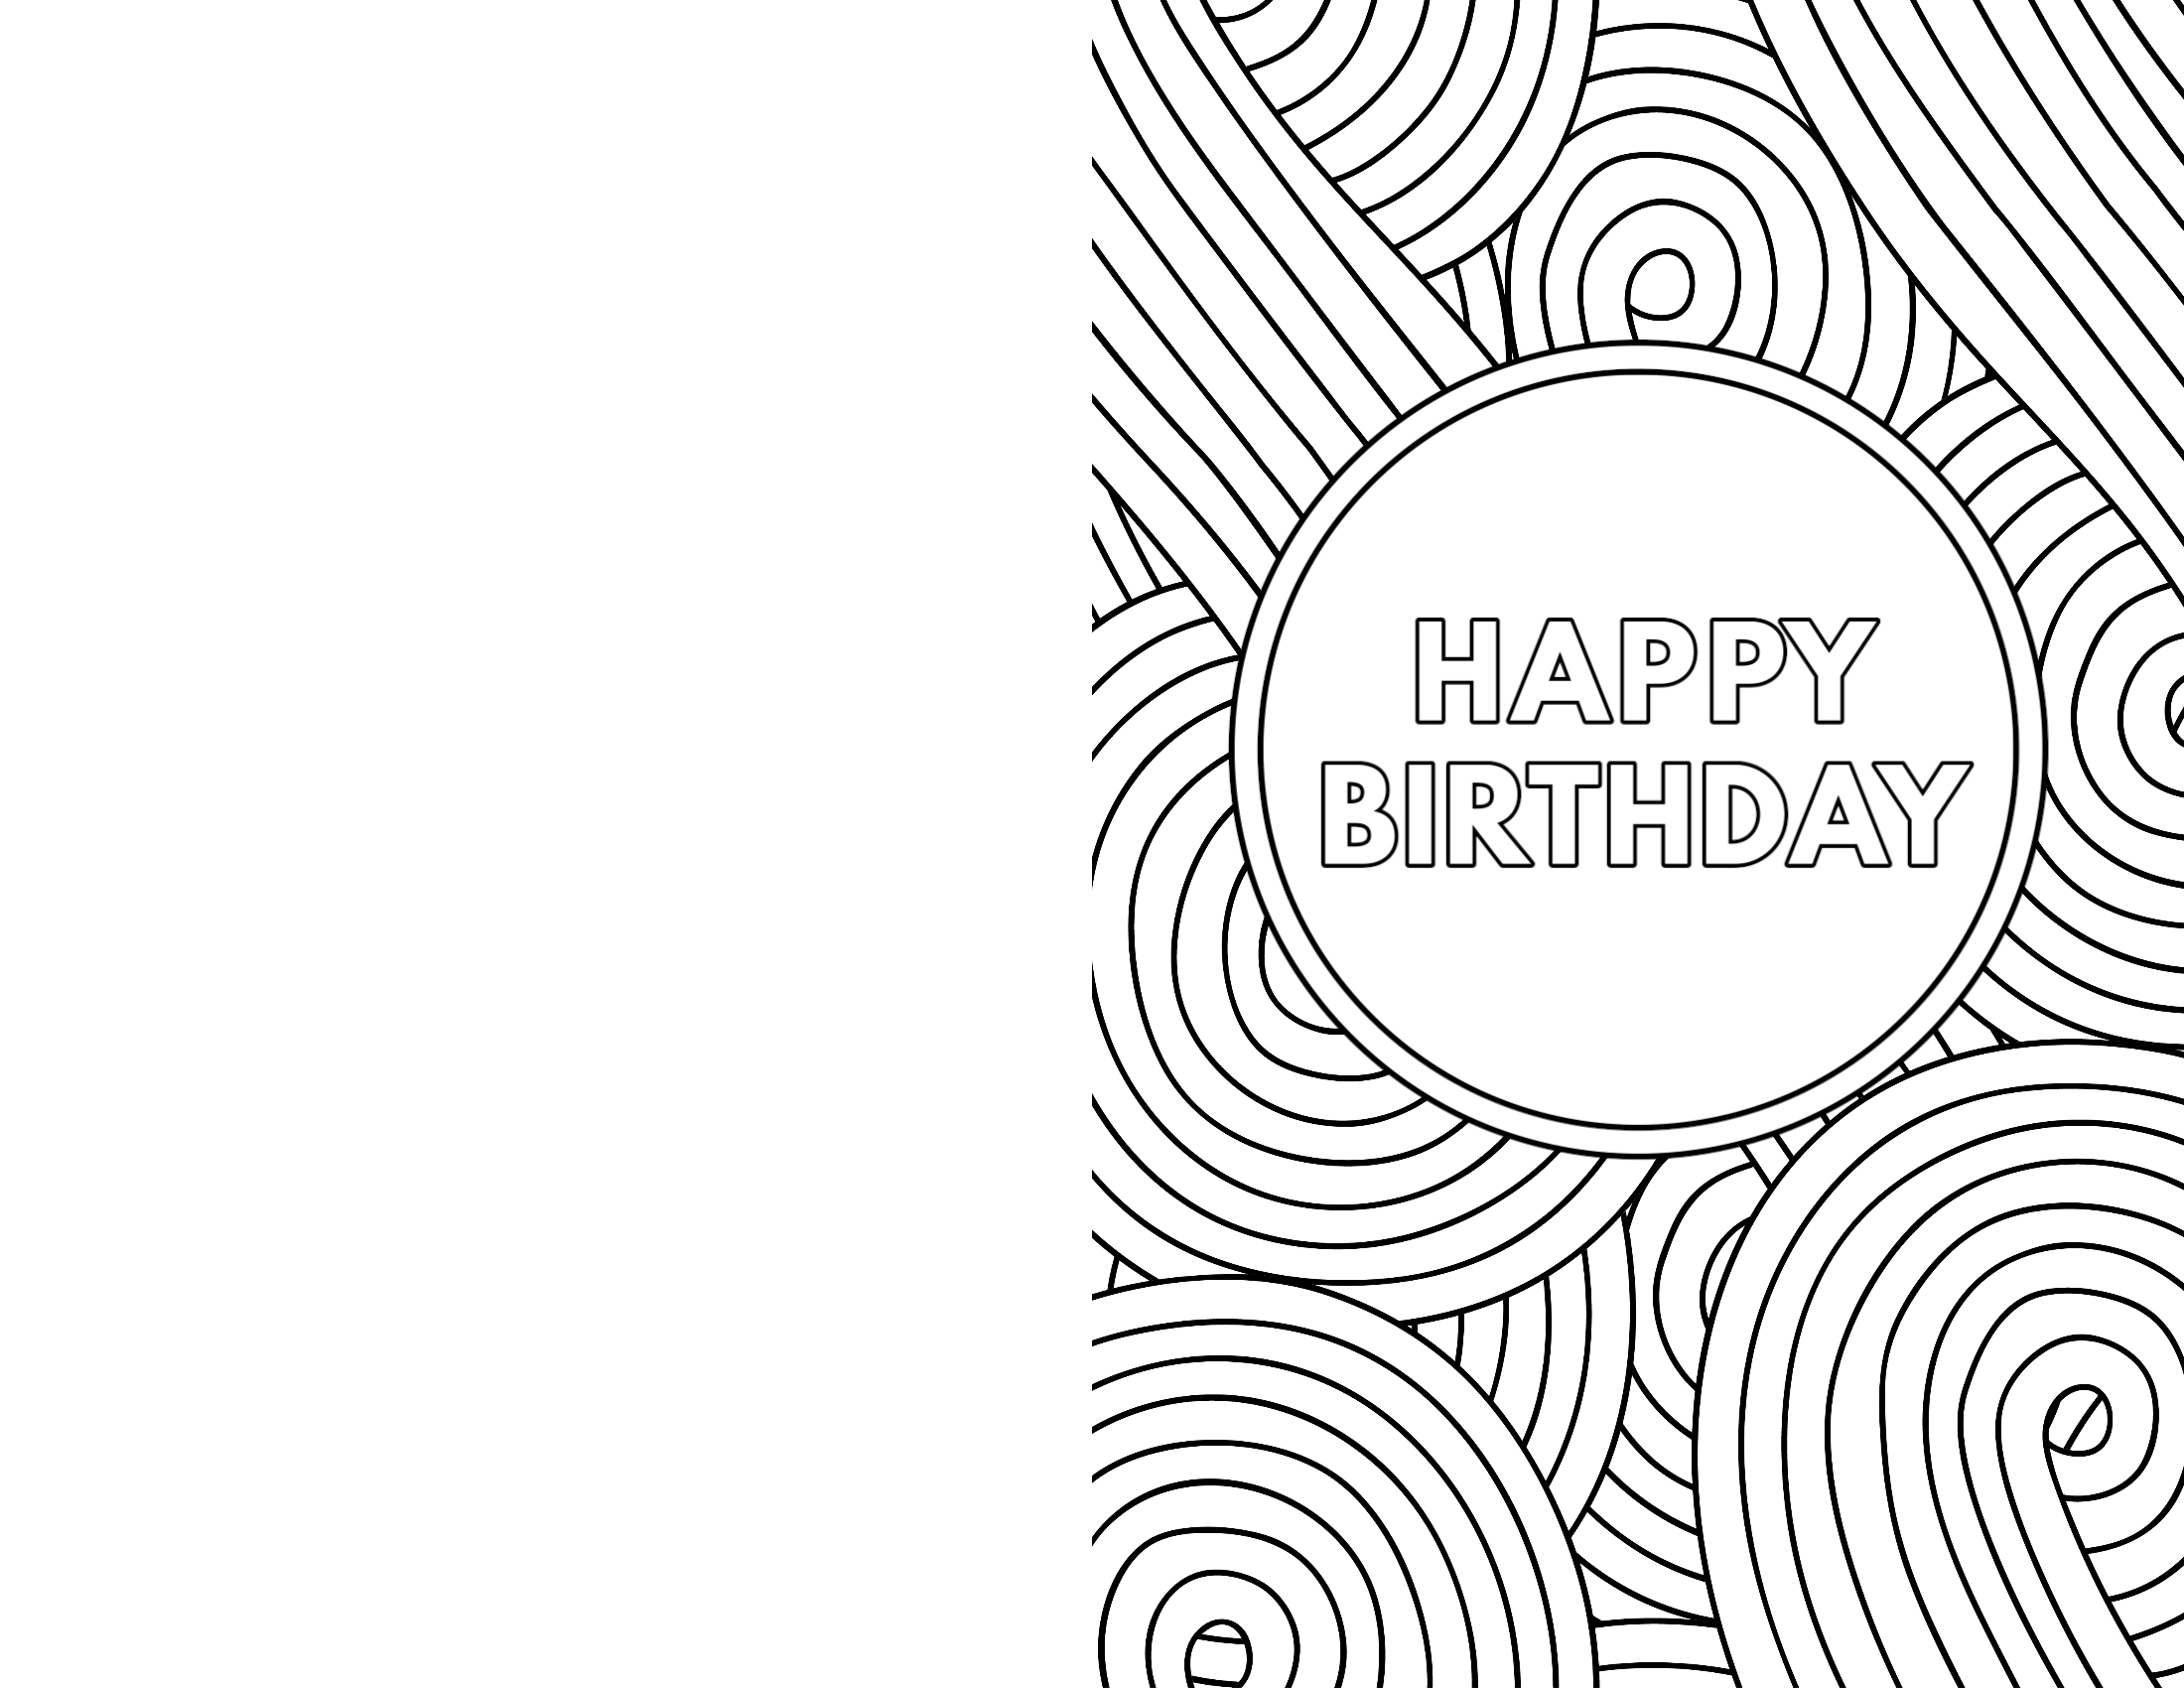 free birthday cards templates downloads